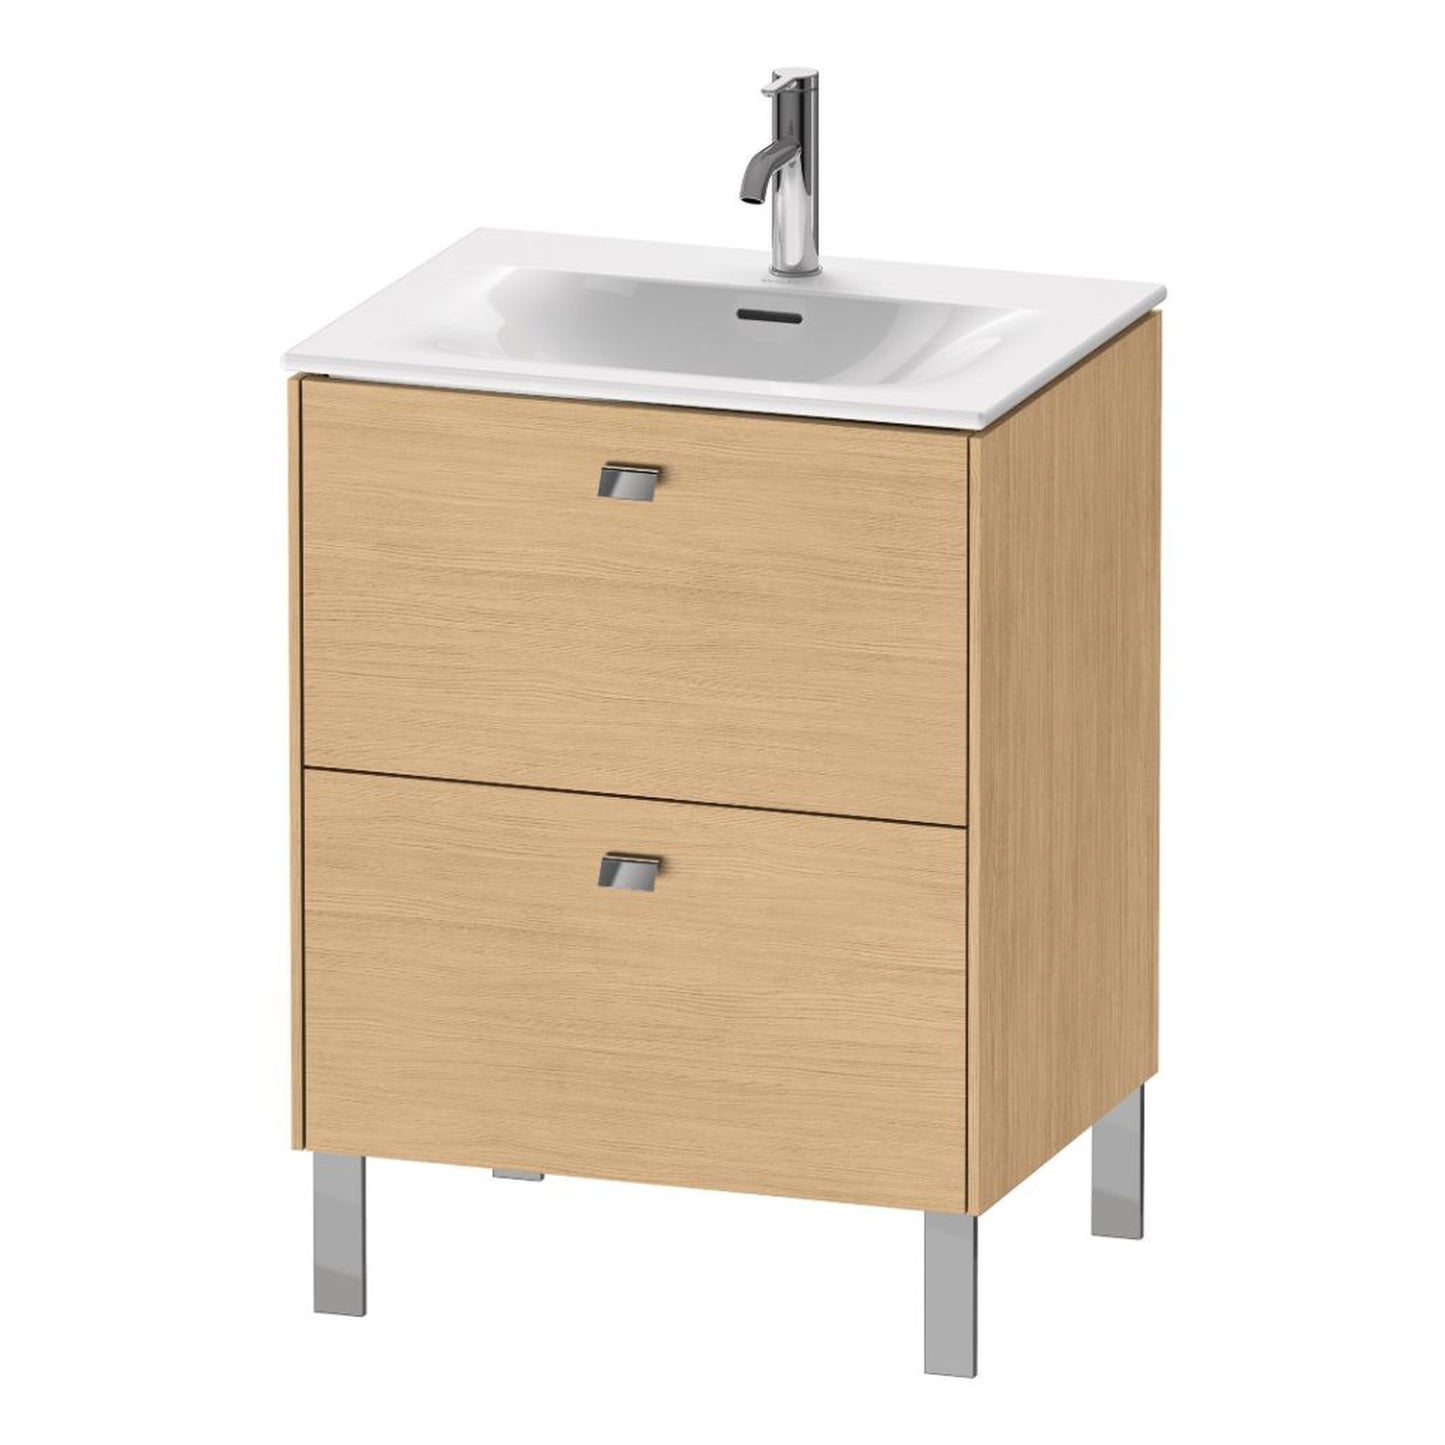 Duravit Brioso BR45100 24" x 27" x 19" Two Drawer Floor Standing Vanity Unit in Natural Oak and Chrome Handle